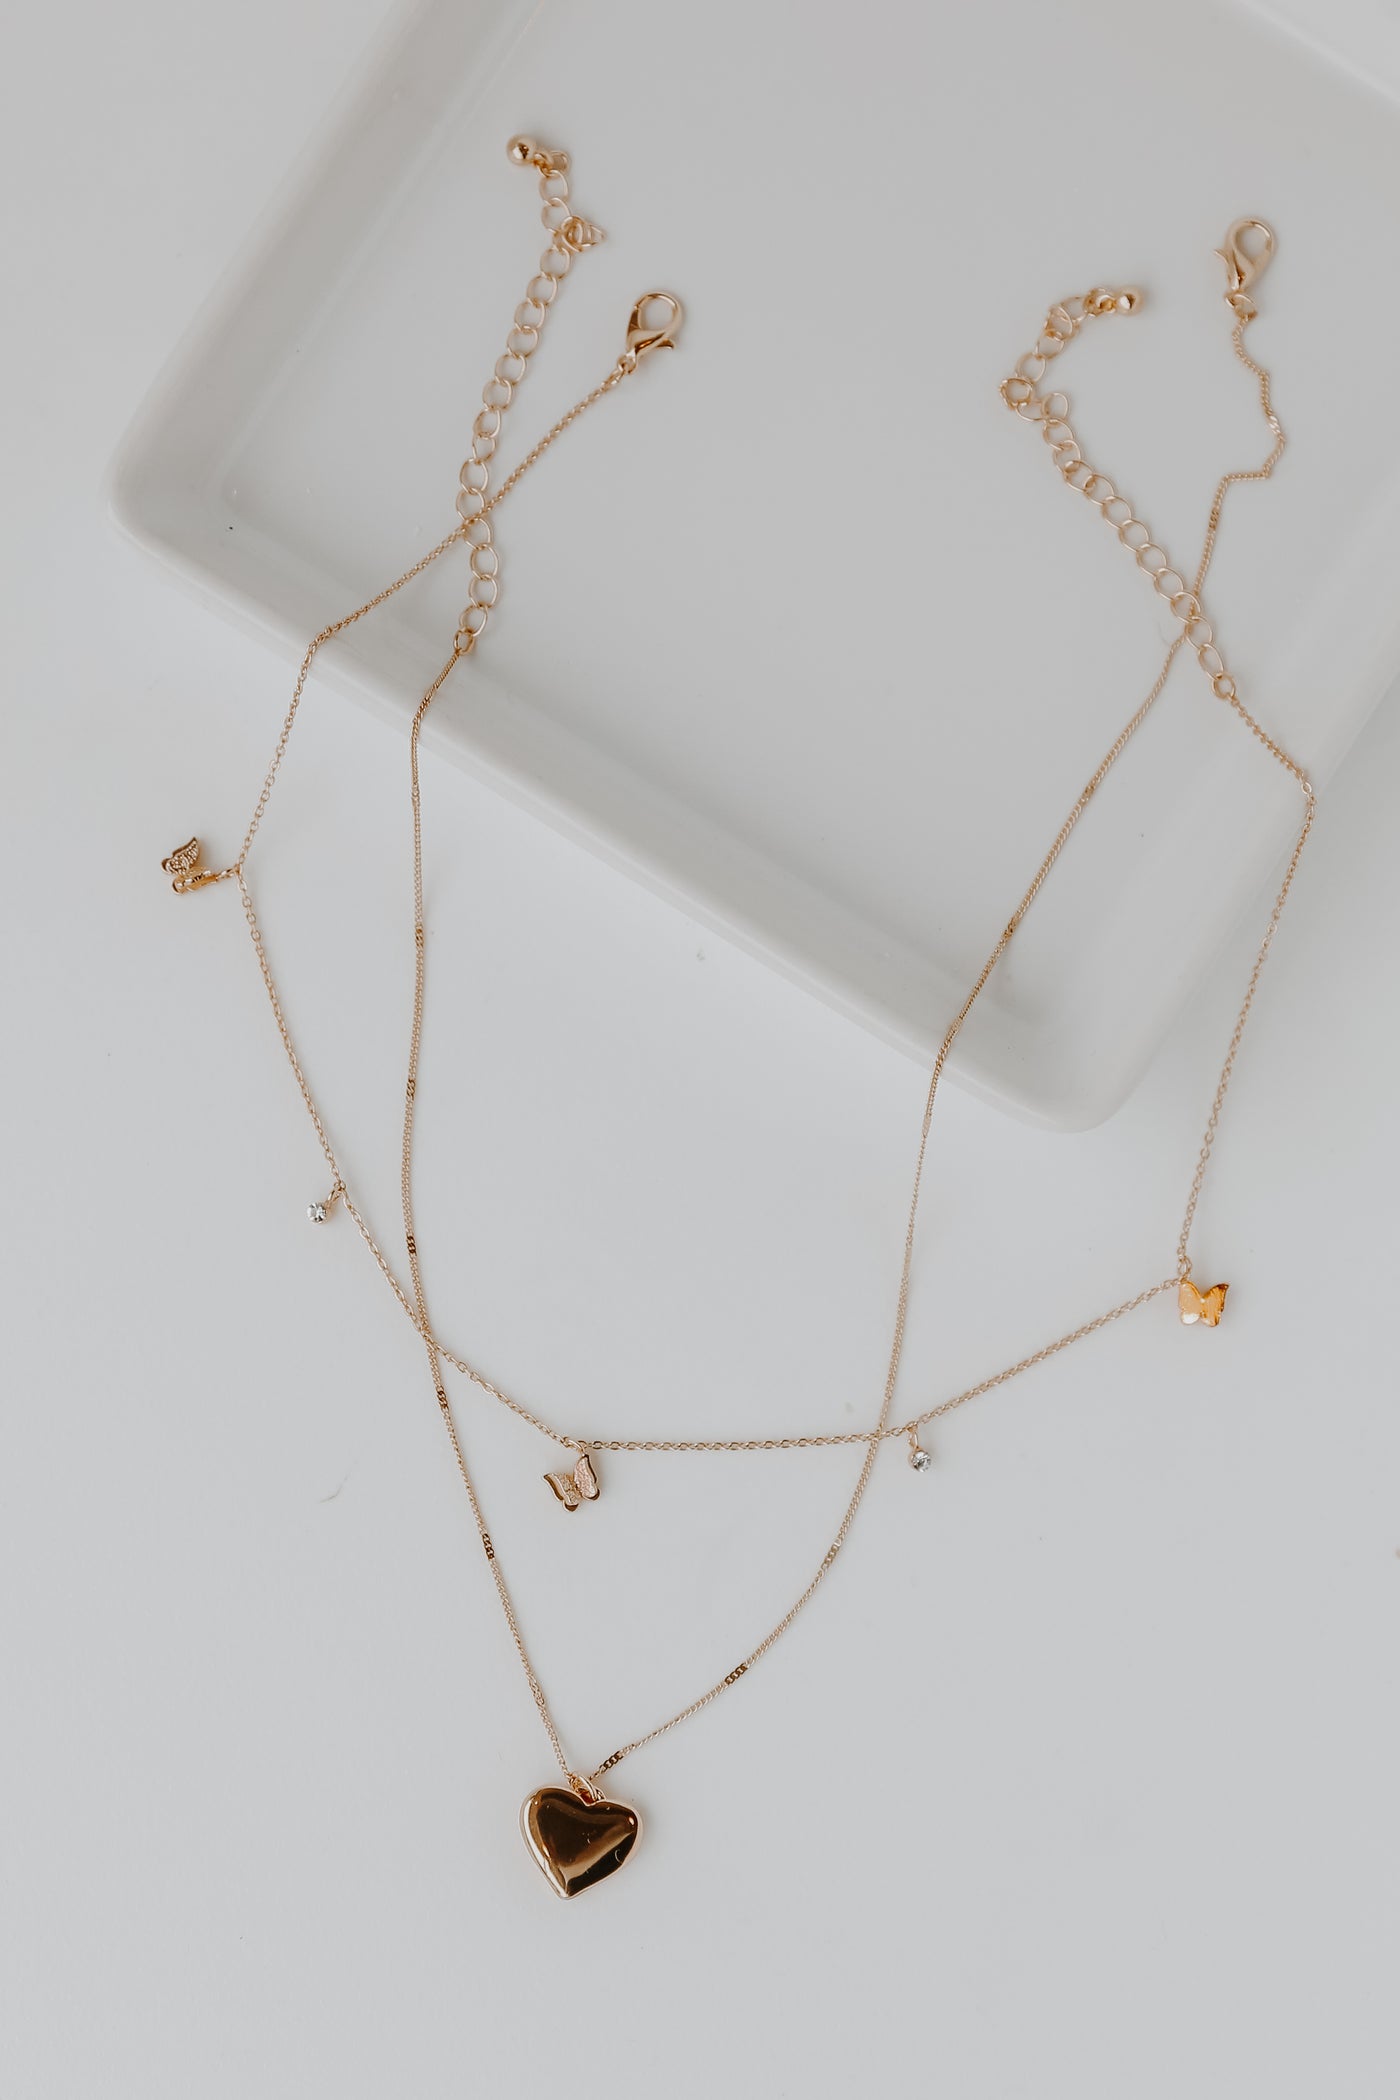 Gold Butterfly + Heart Layered Necklace flat lay